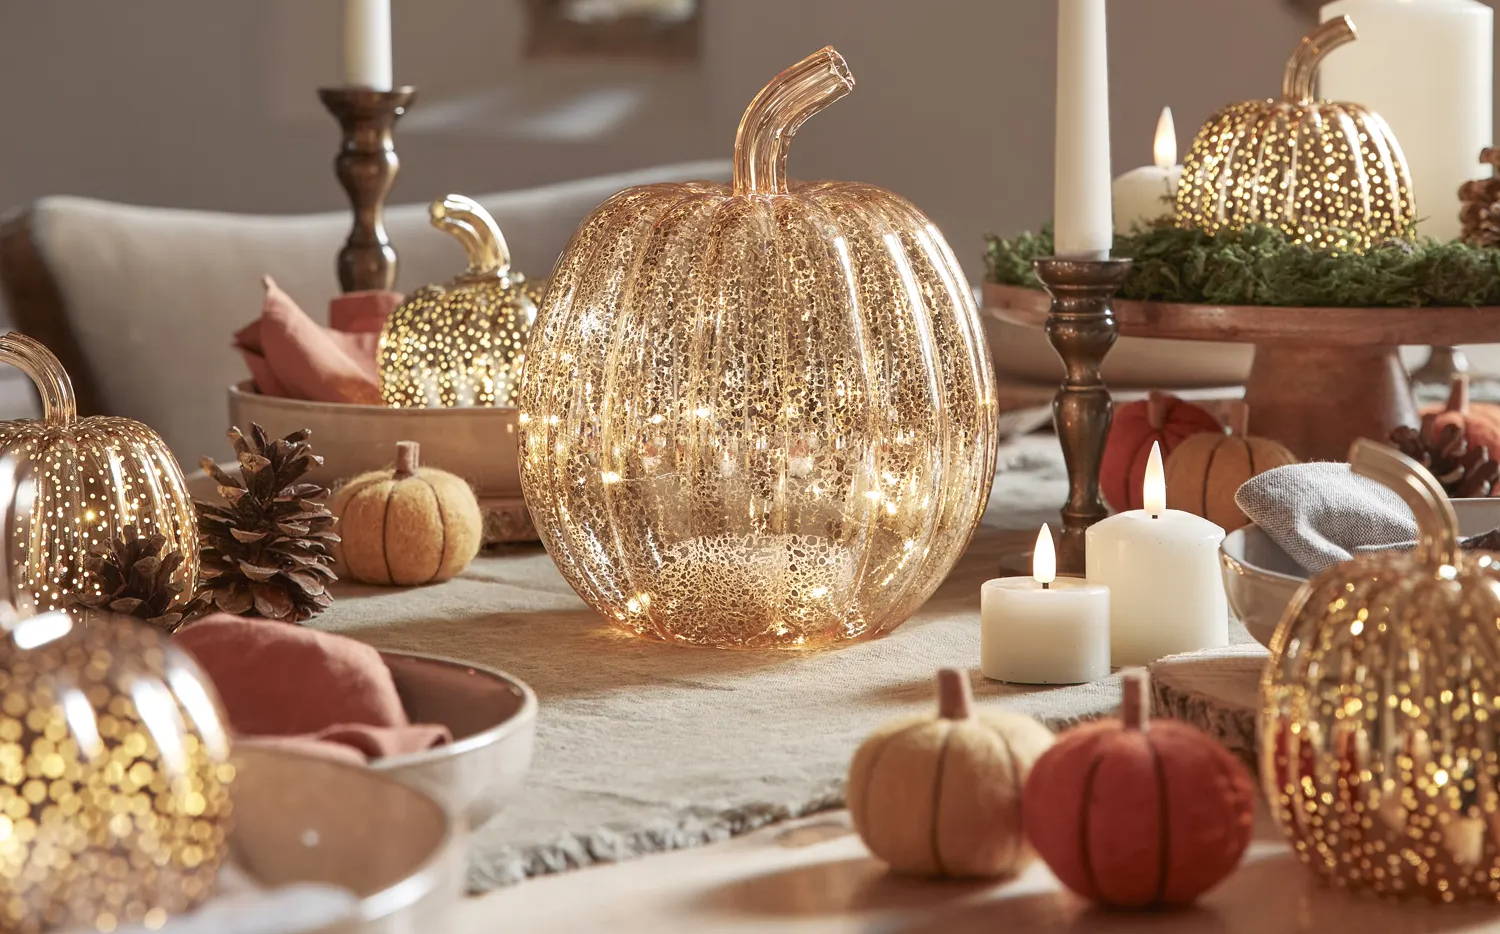 Autumn table with light up pumpkins and LED candles